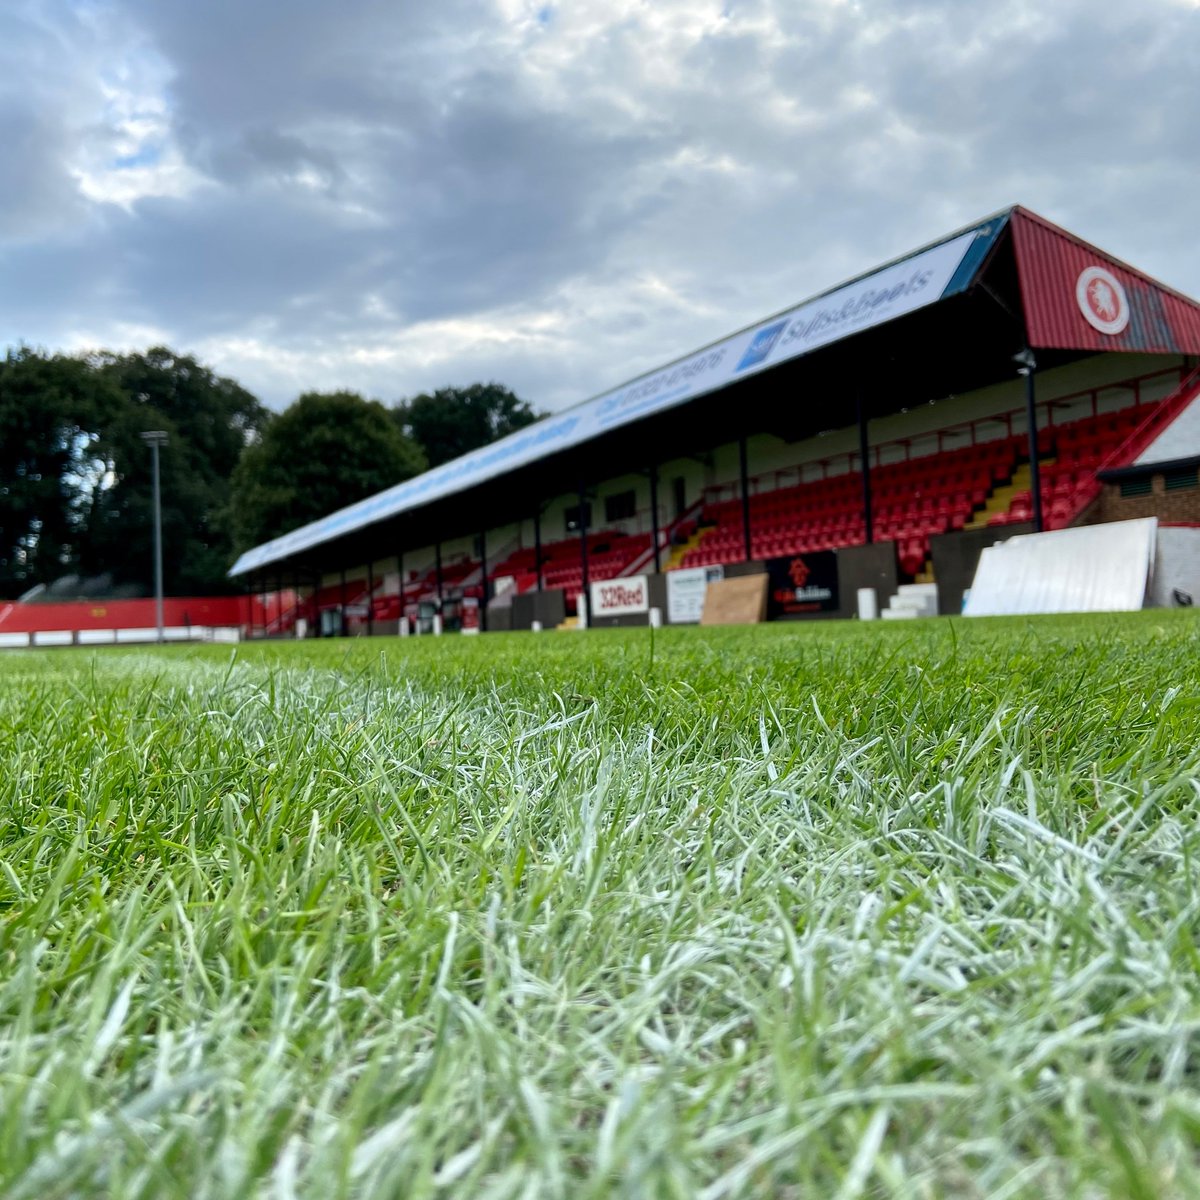 🚶‍♂️🎟️ PURCHASE IN PERSON The club will be open between 6.30pm and 8.30pm this evening (Thursday) for any supporters who would like to buy their early-bird 2024/25 season ticket in person. #WeAreWings🪽